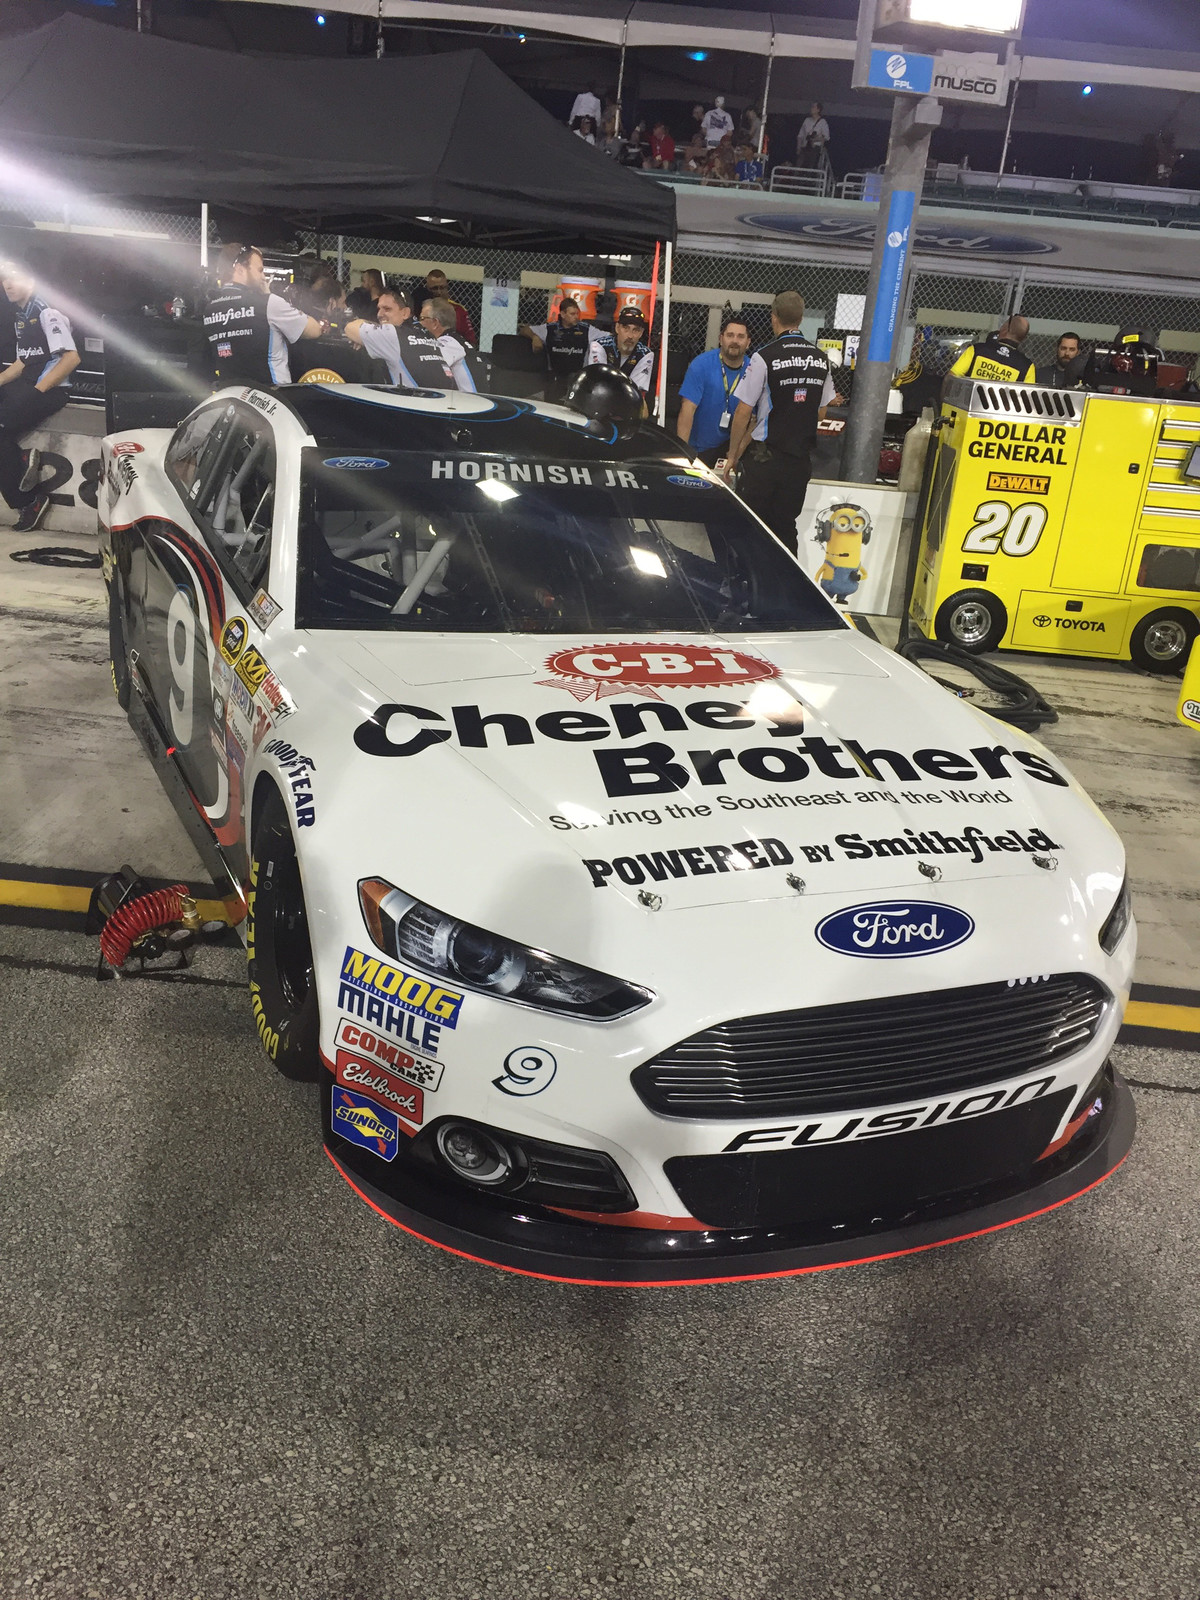 The #9 Cheney Brothers Ford Fusion and crew awaiting qualifying at Homestead-Miami Speedway on November 20th, 2015 (Photo credit: Roy Gangdal of BK Racing)